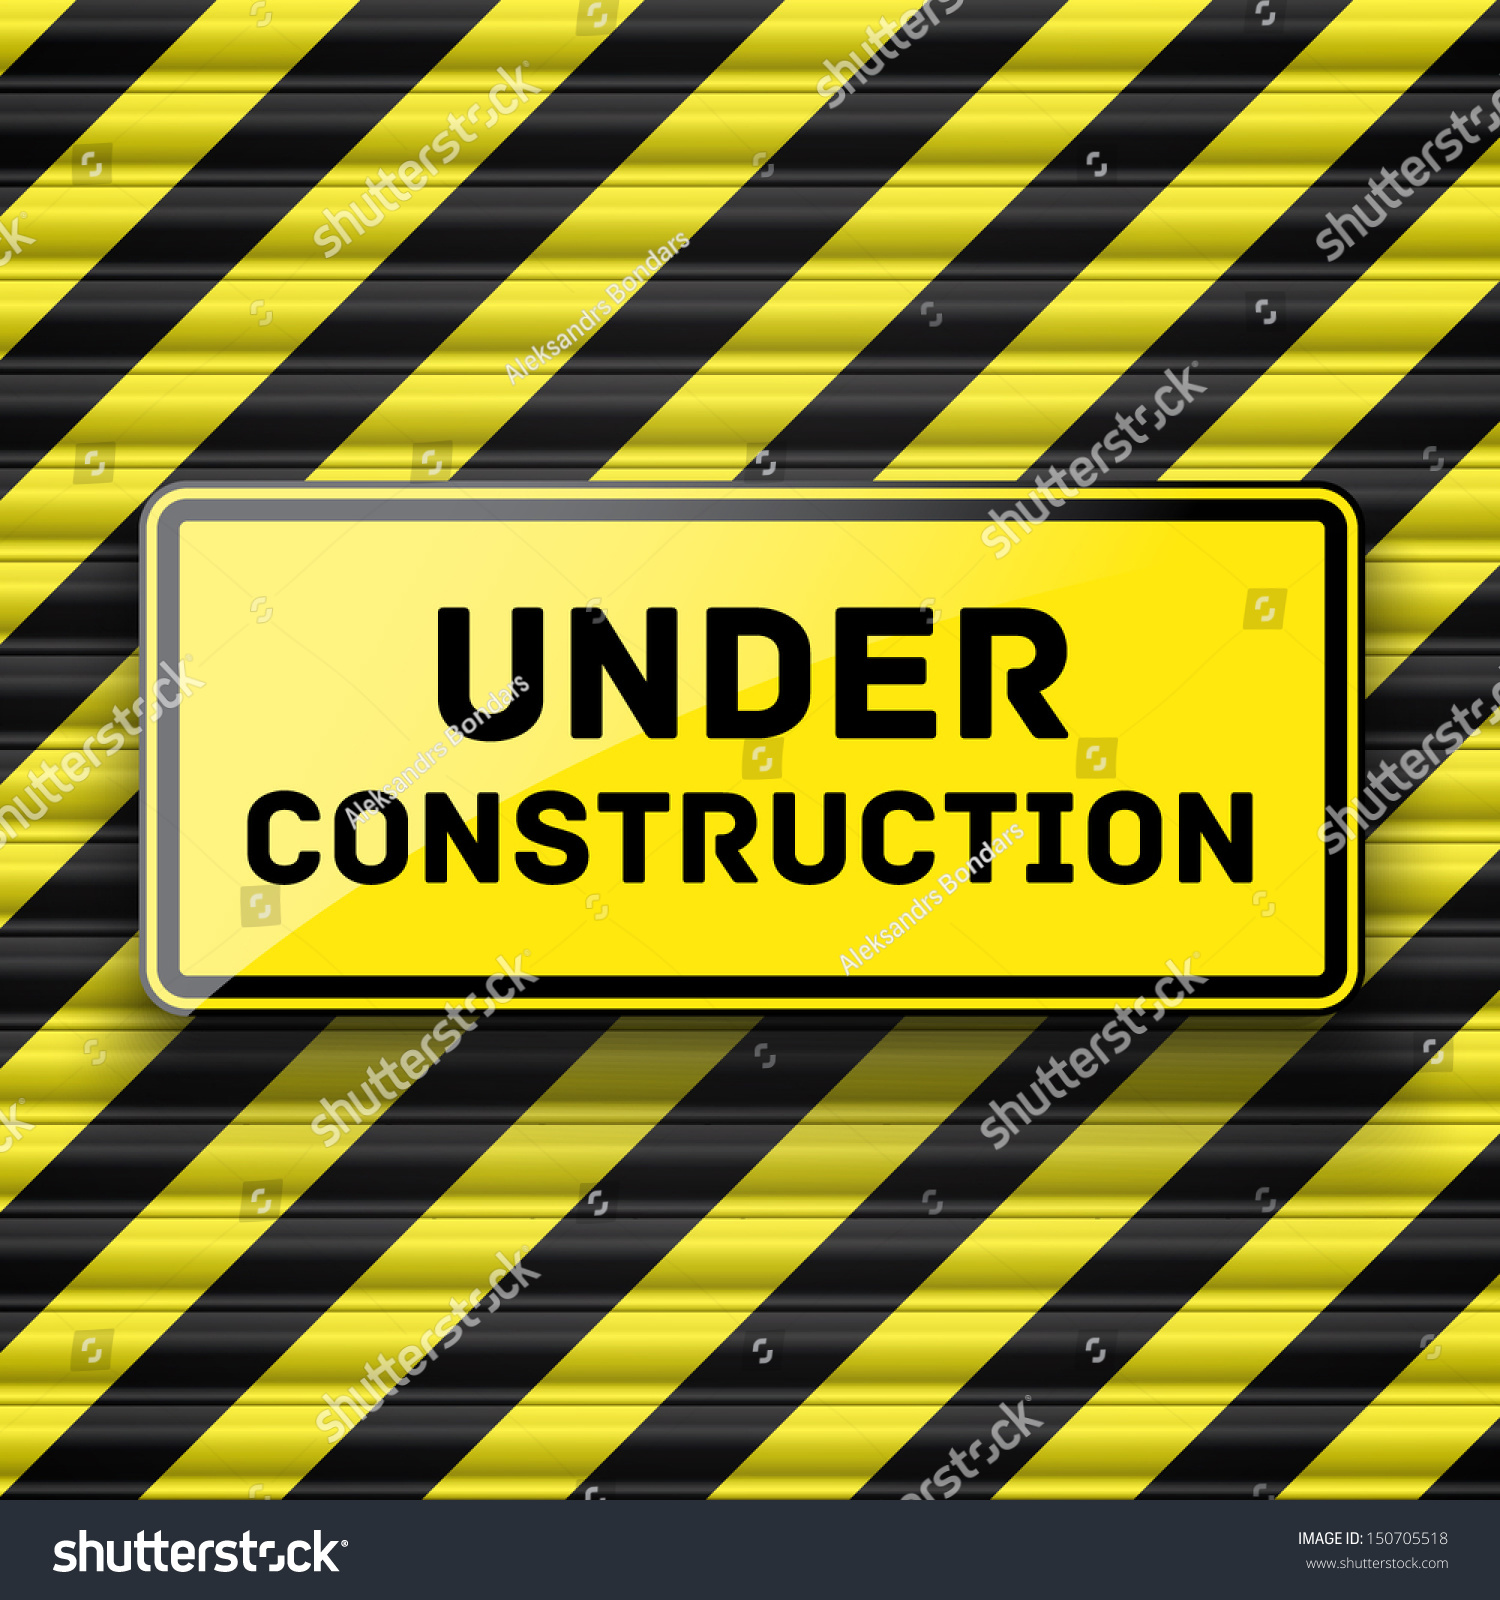 Under Construction Sign Hanging On Striped Stock Vector 150705518 ...